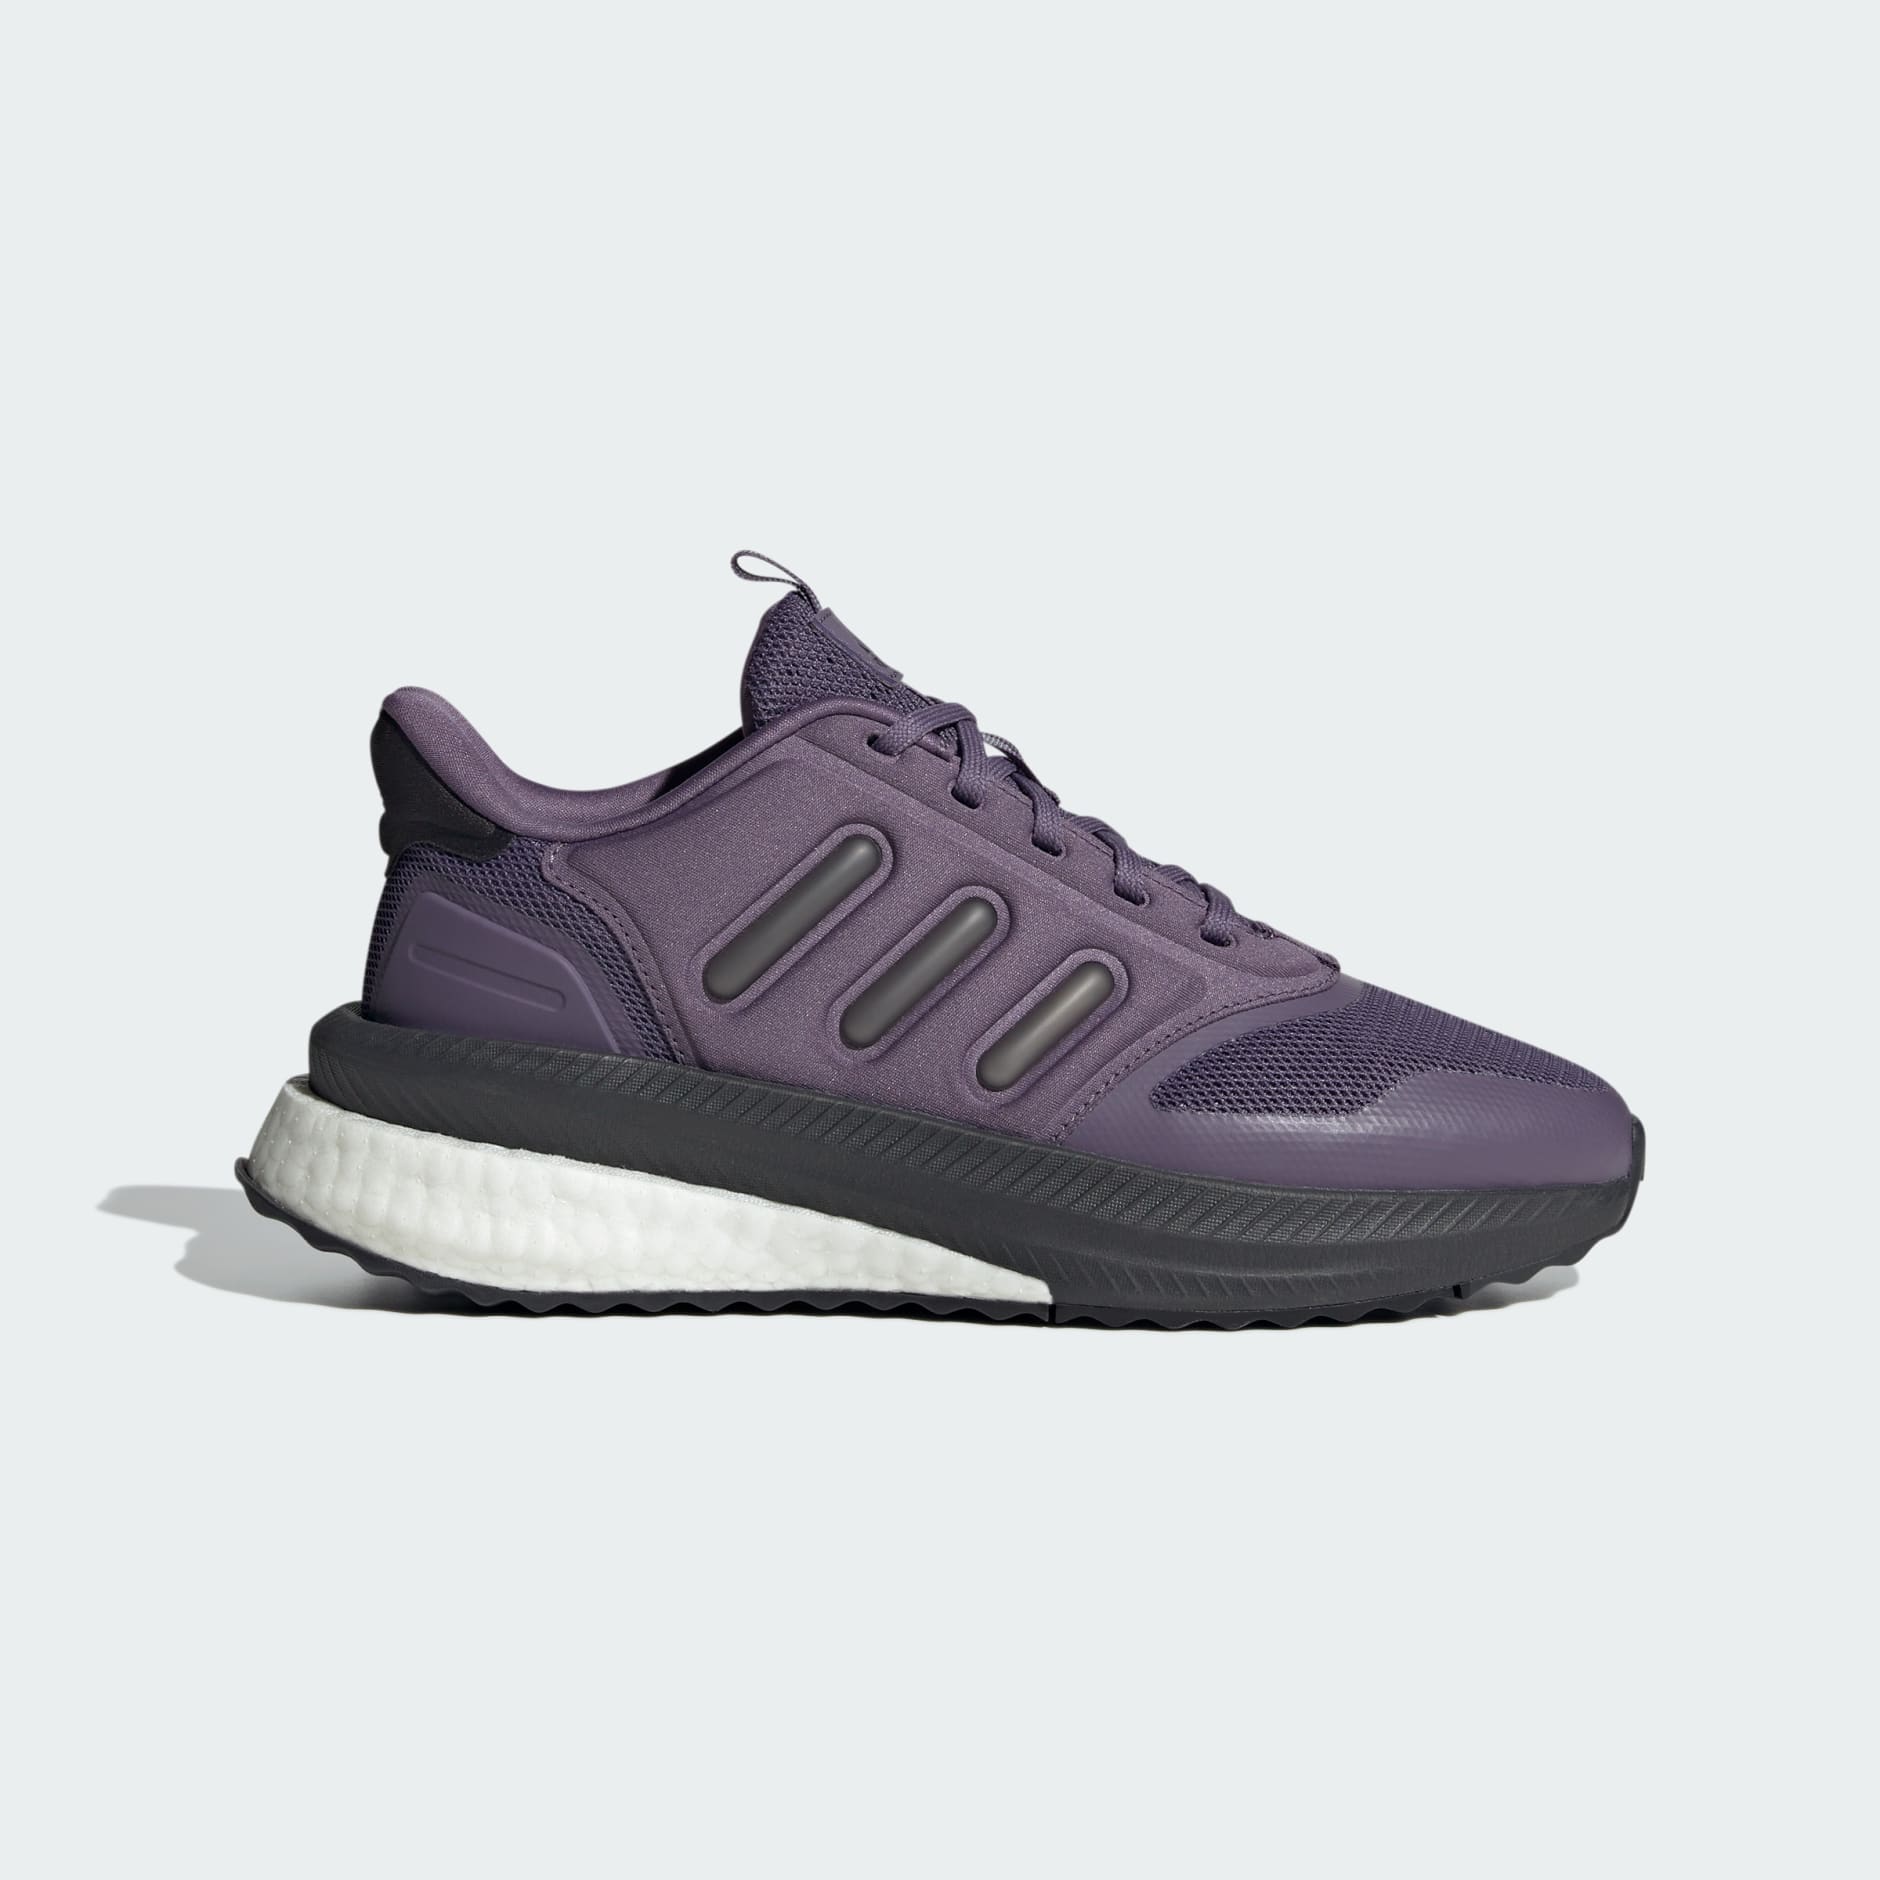 Shoes - X_PLRPHASE Shoes - Purple | adidas South Africa